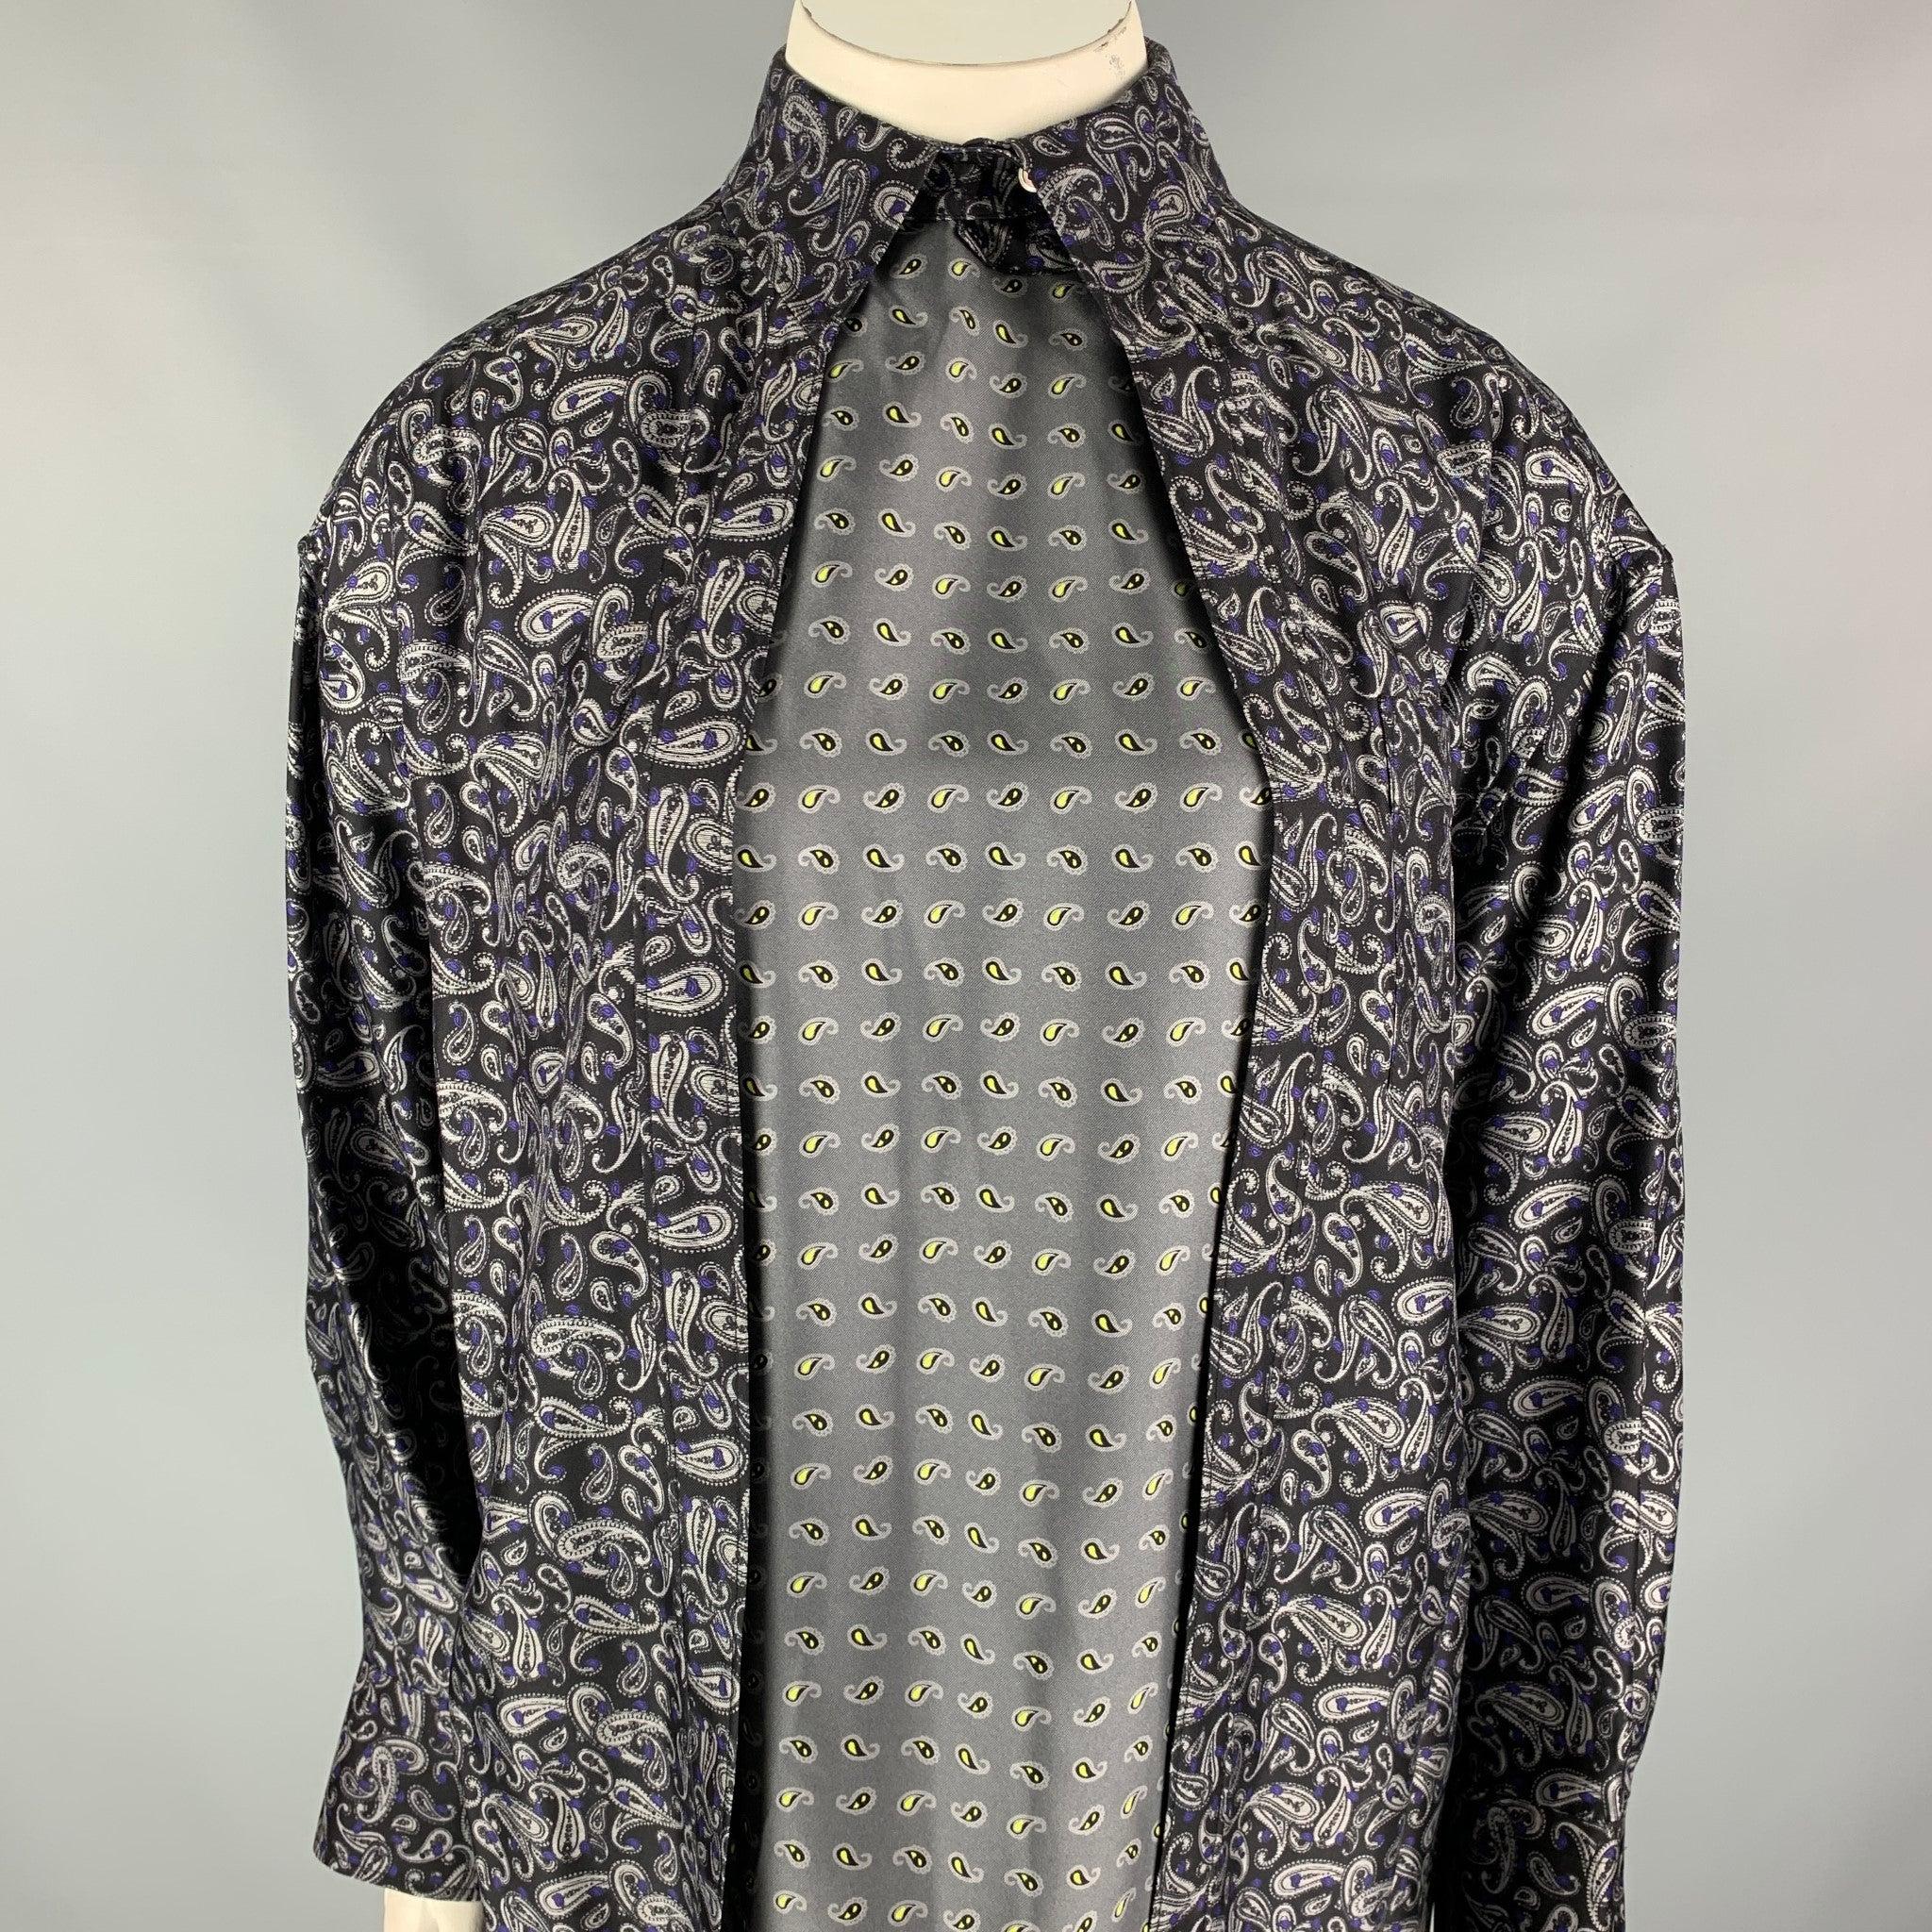 ALEXANDER WANG shirt comes in a navy & grey paisley silk featuring a layered tank design, top single button closure, single patch pocket, and a open front.
New With Tags.  

Marked:   10 

Measurements: 
 
Shoulder: 23 inches  Bust: 42 inches 